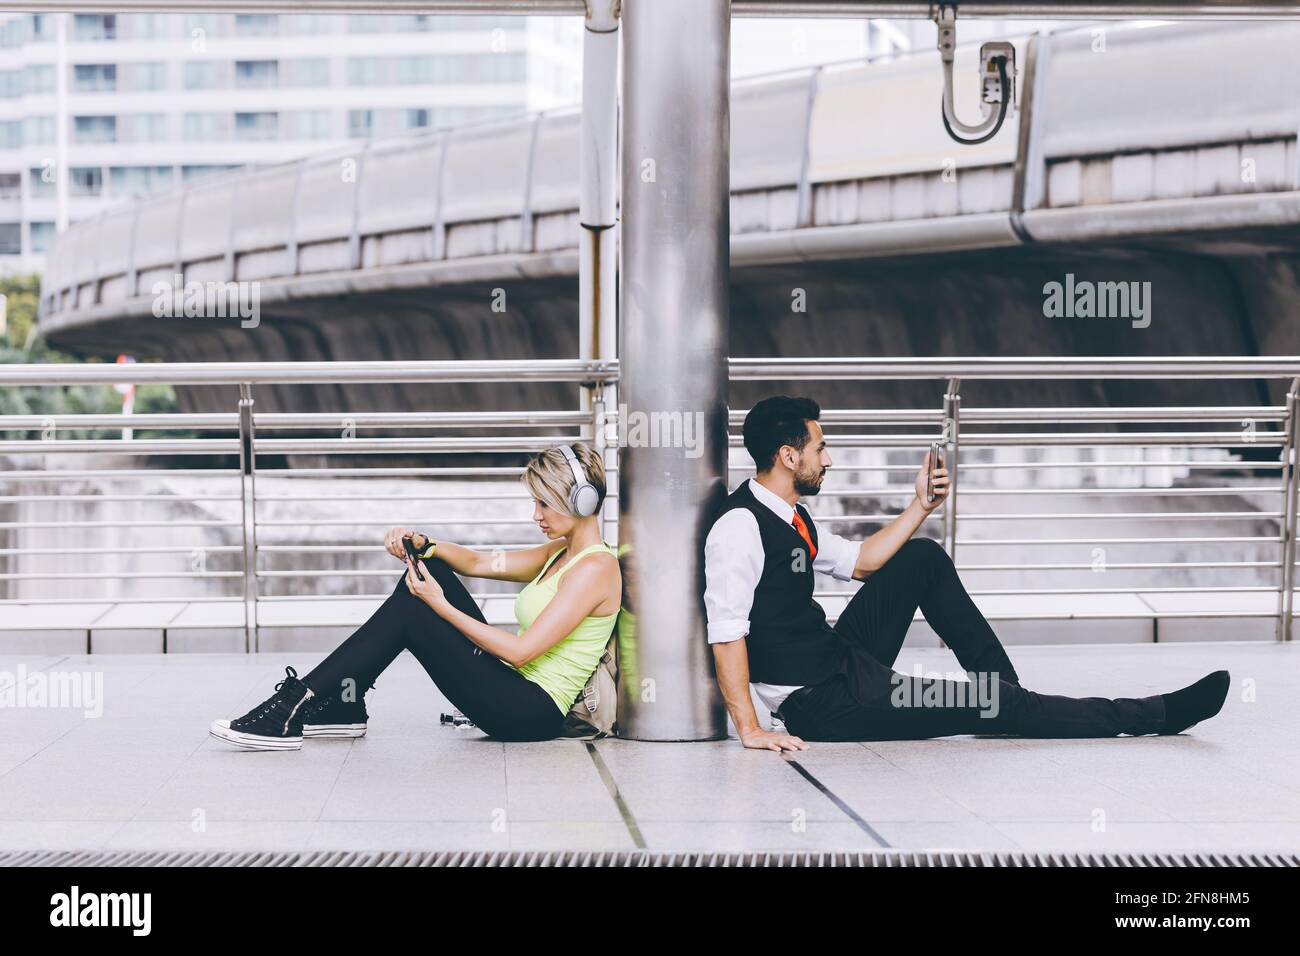 Two people with unique difference lifestyle compare both sport girl and businessman using smartphone. Stock Photo